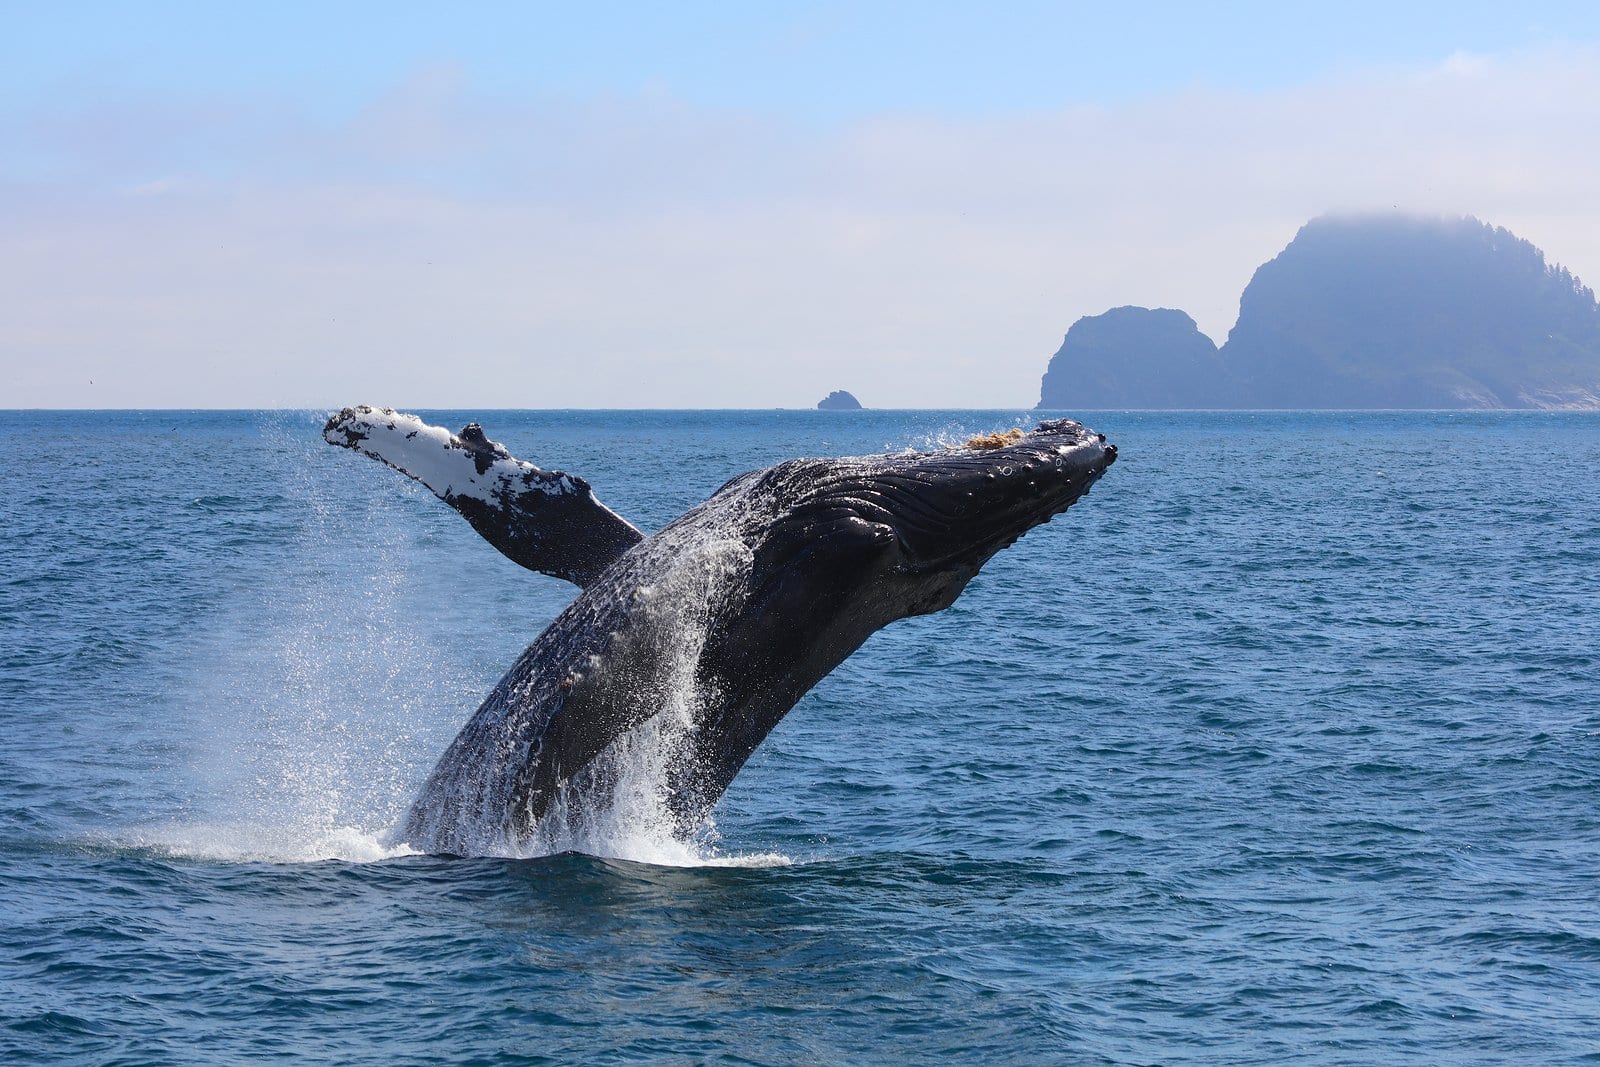 humpback whale breaching the water